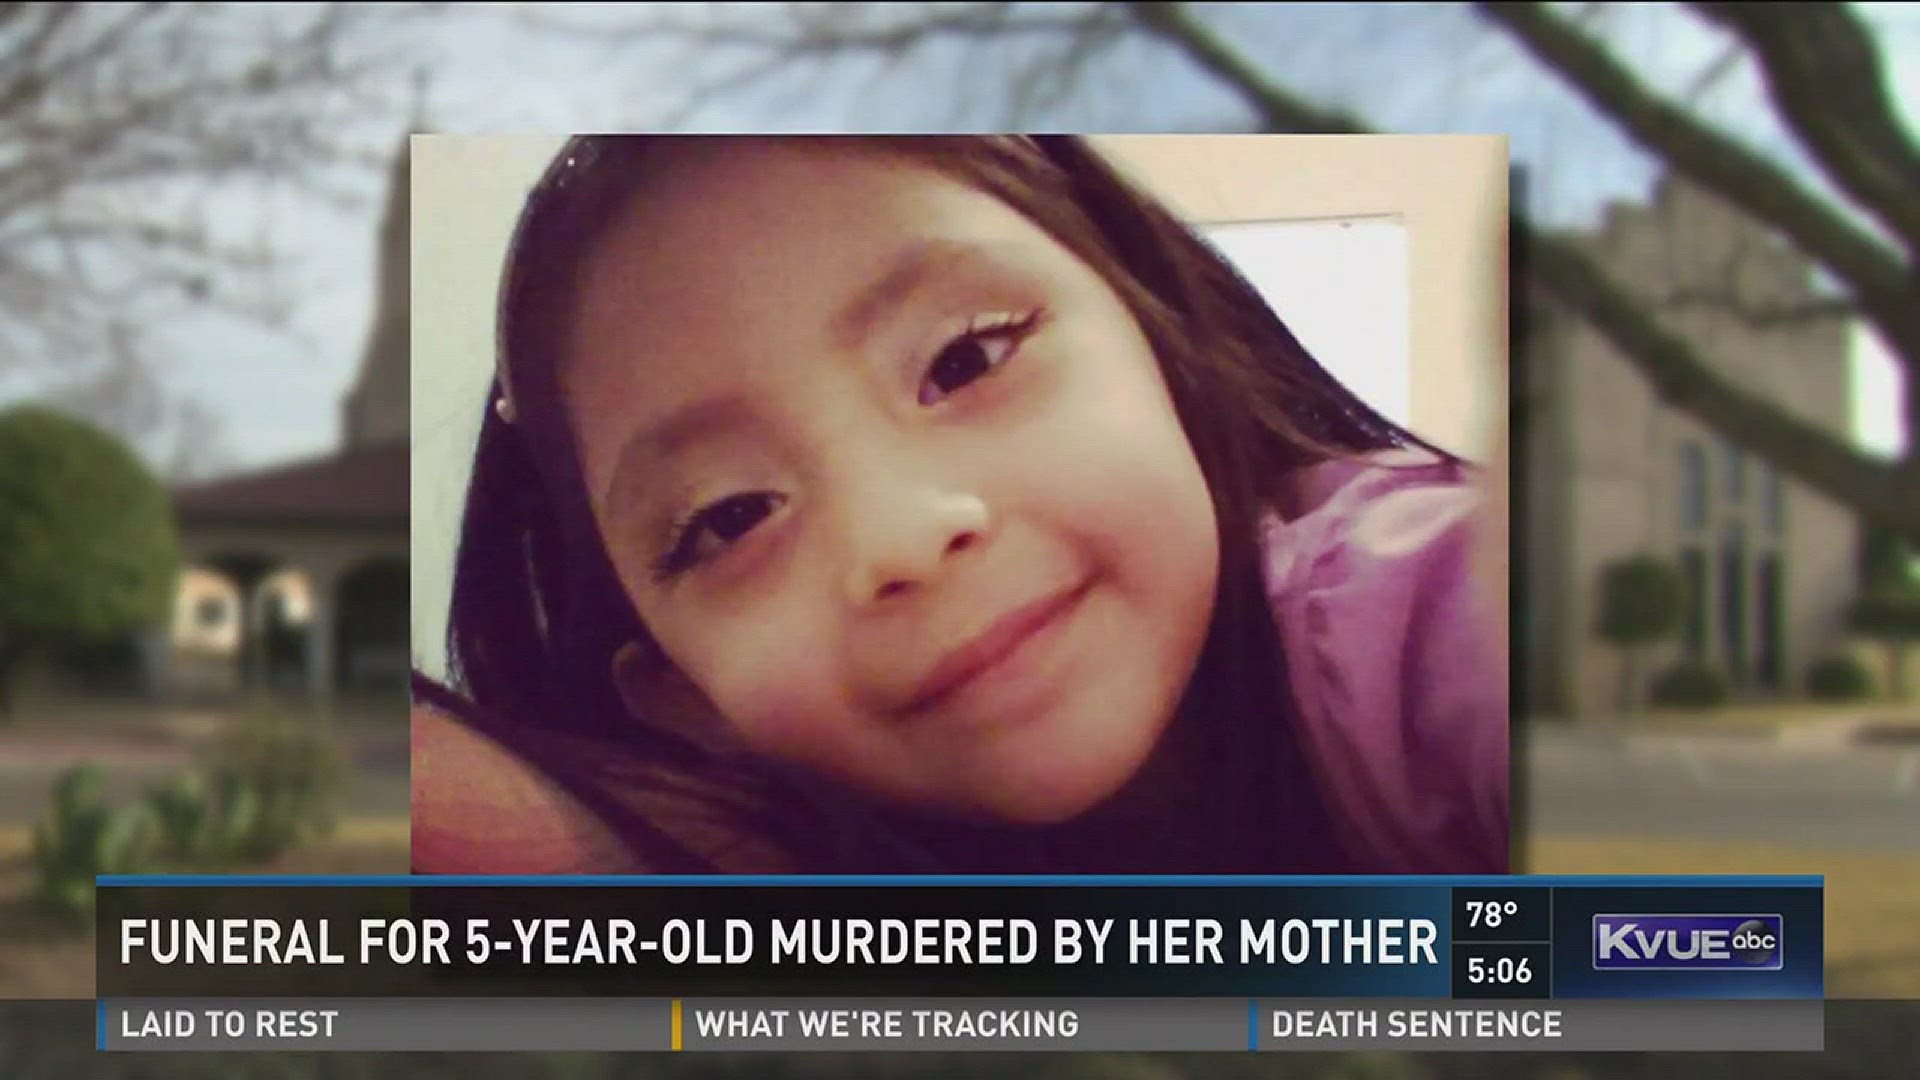 A funeral was held Tuesday for Giovanna Hernandez, who was allegedly murdered by her mother on Jan. 5.